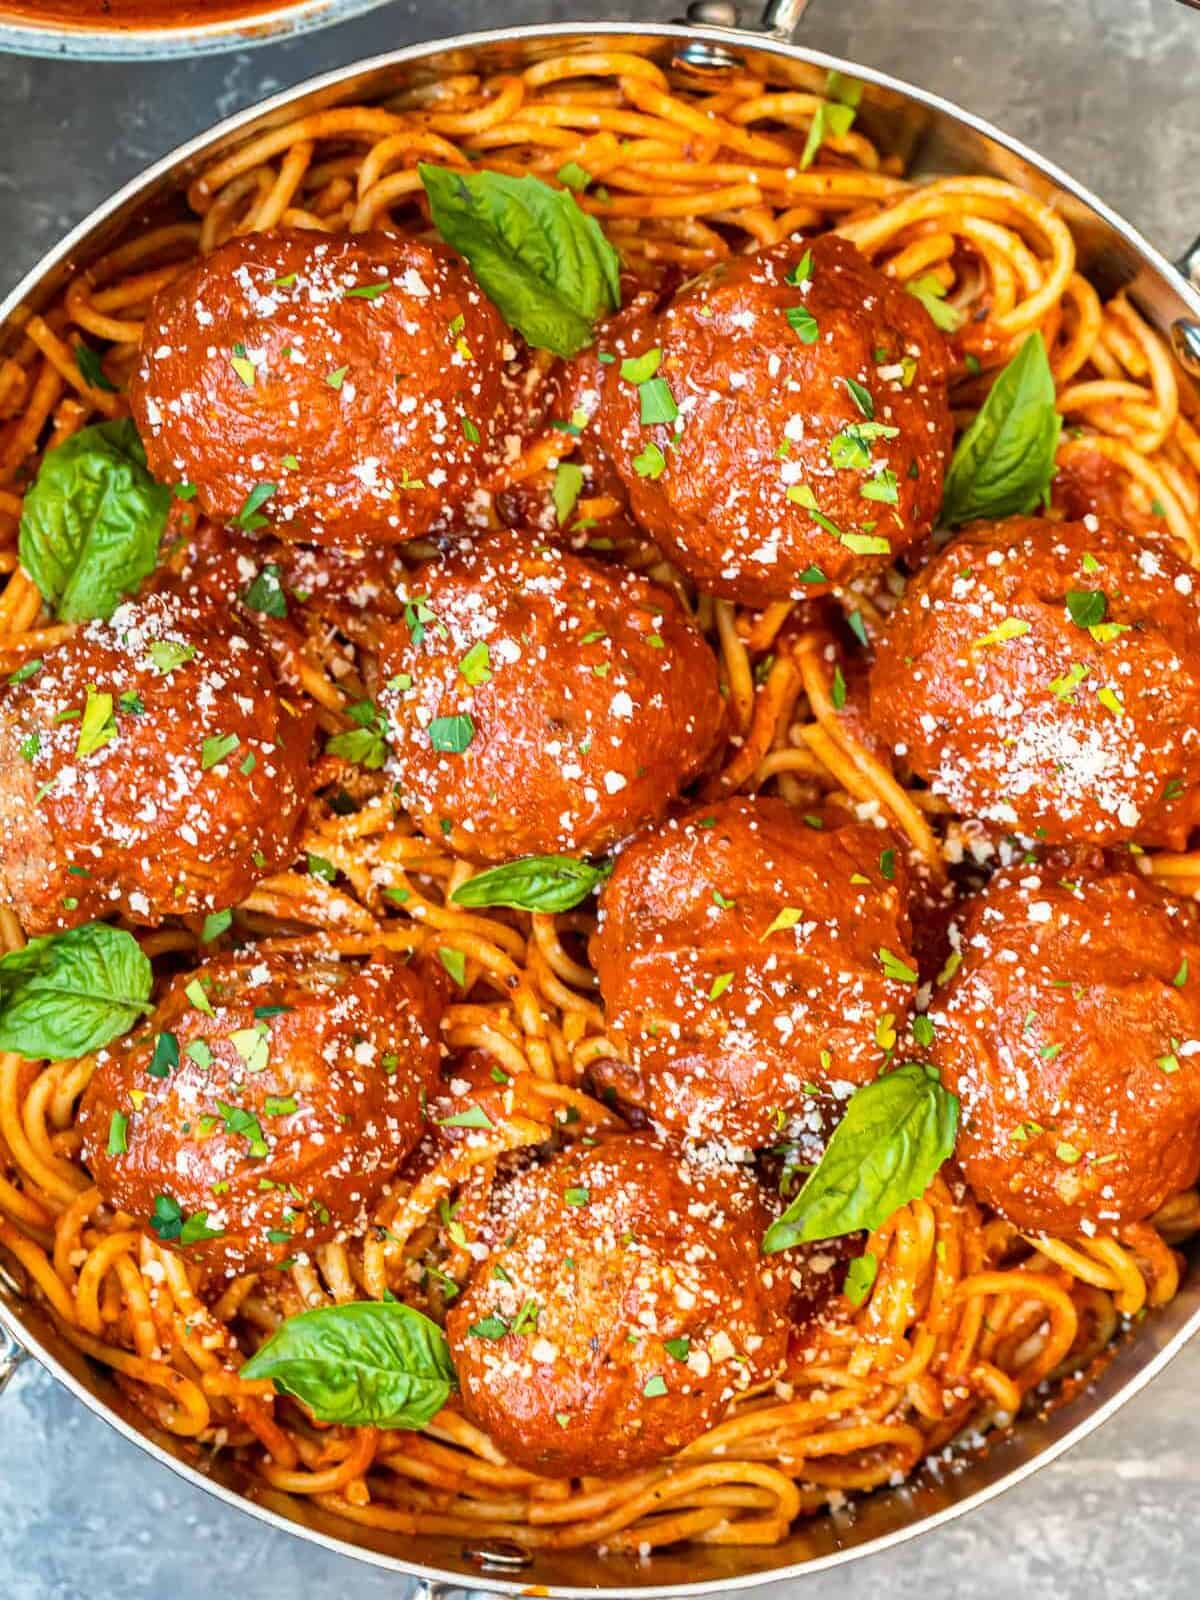 meatballs over pasta in a pan.